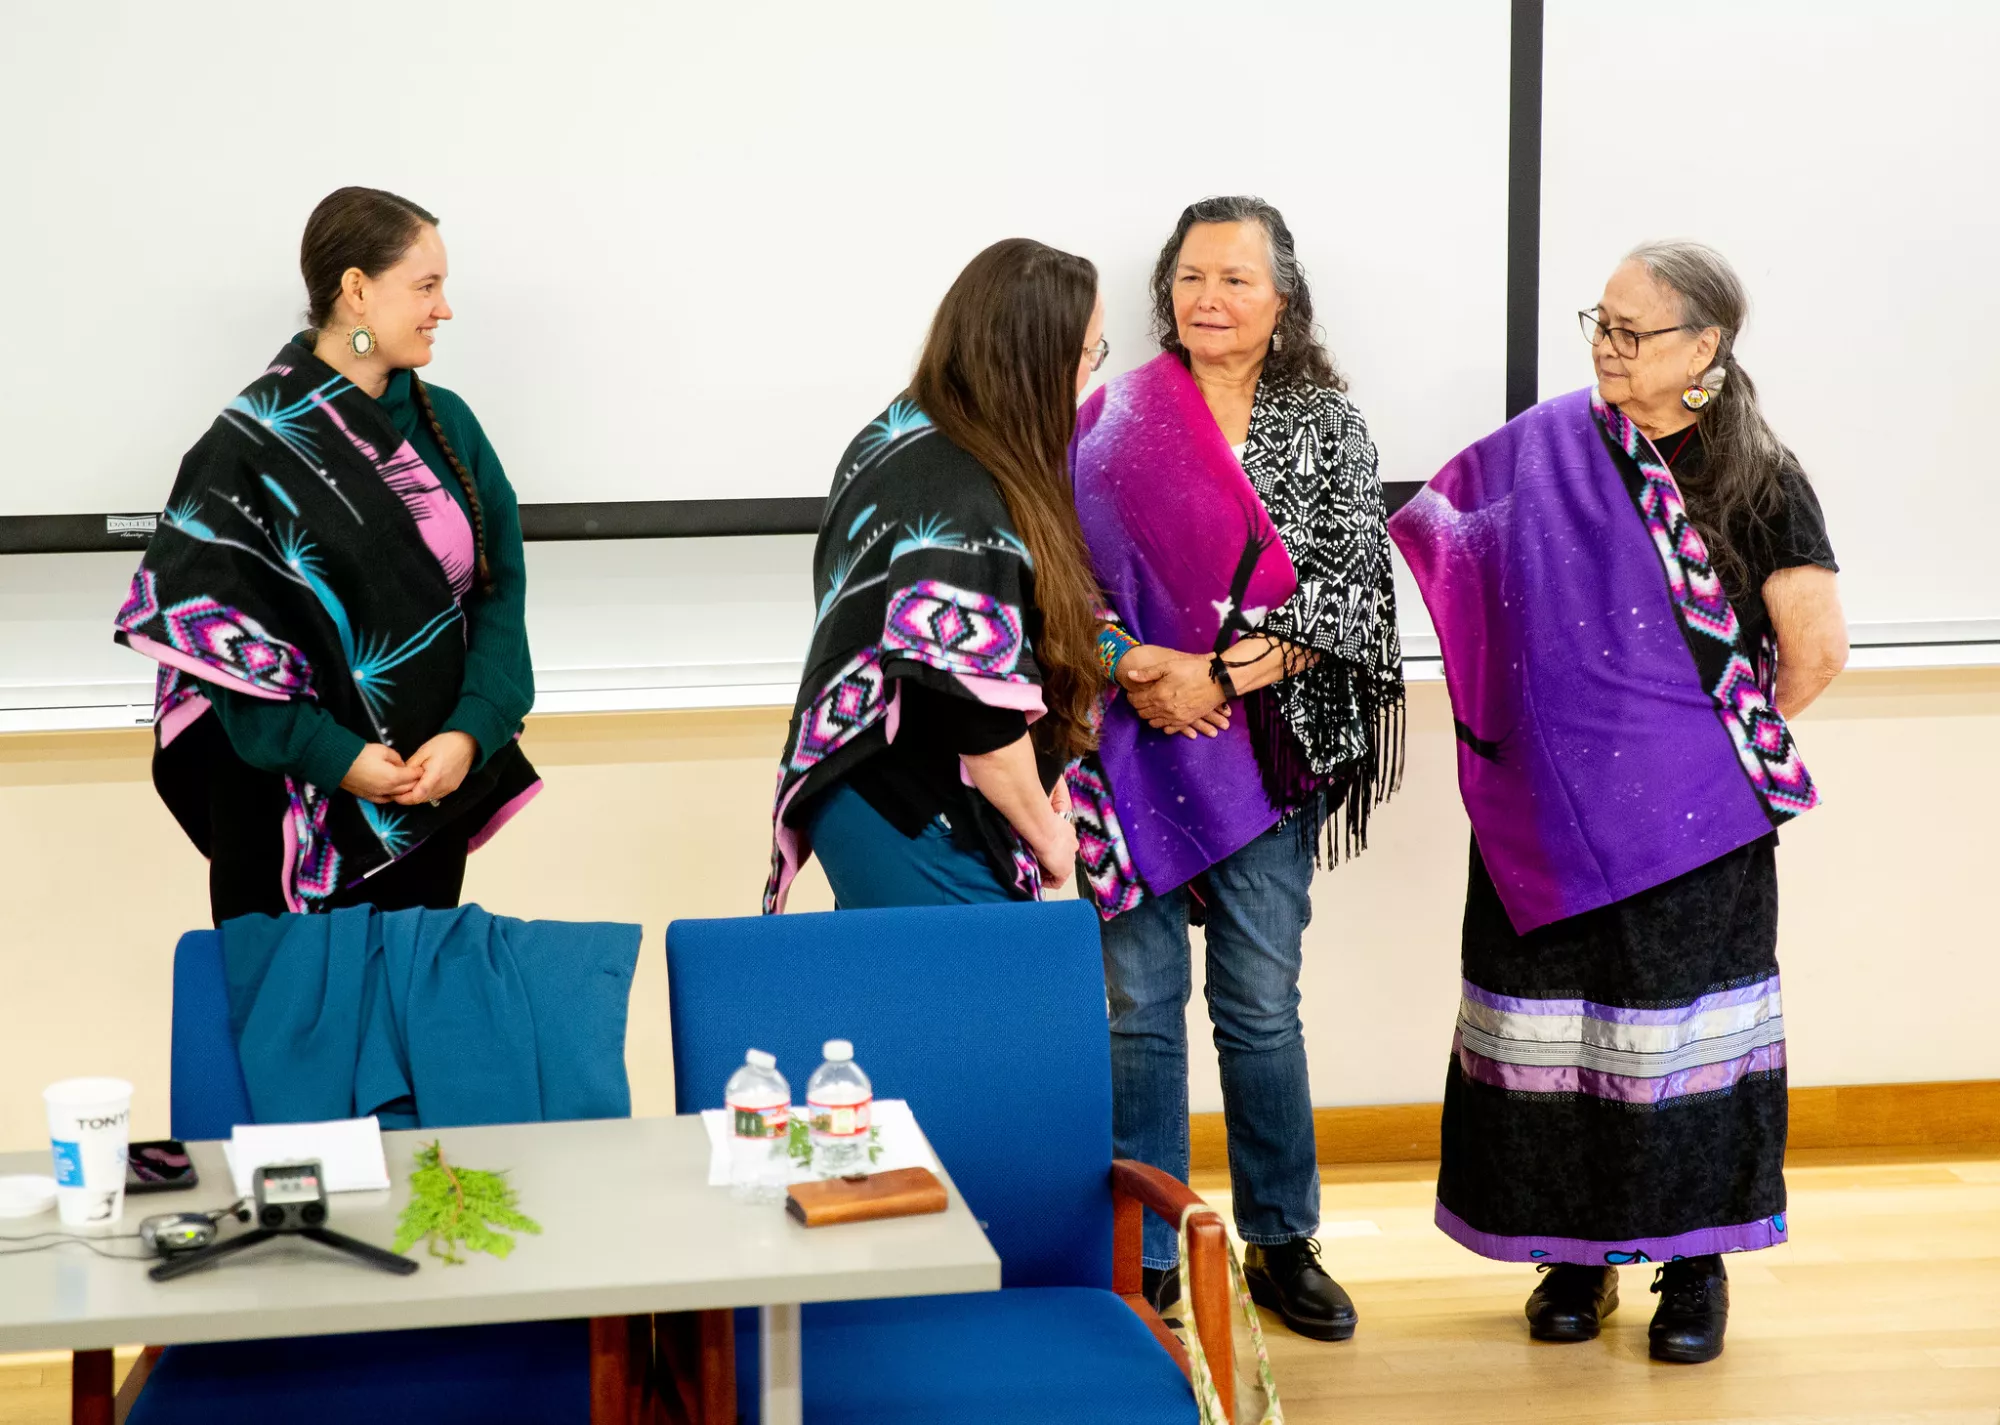 Four Native women at the Hidden Figures events wearing colorful shawls